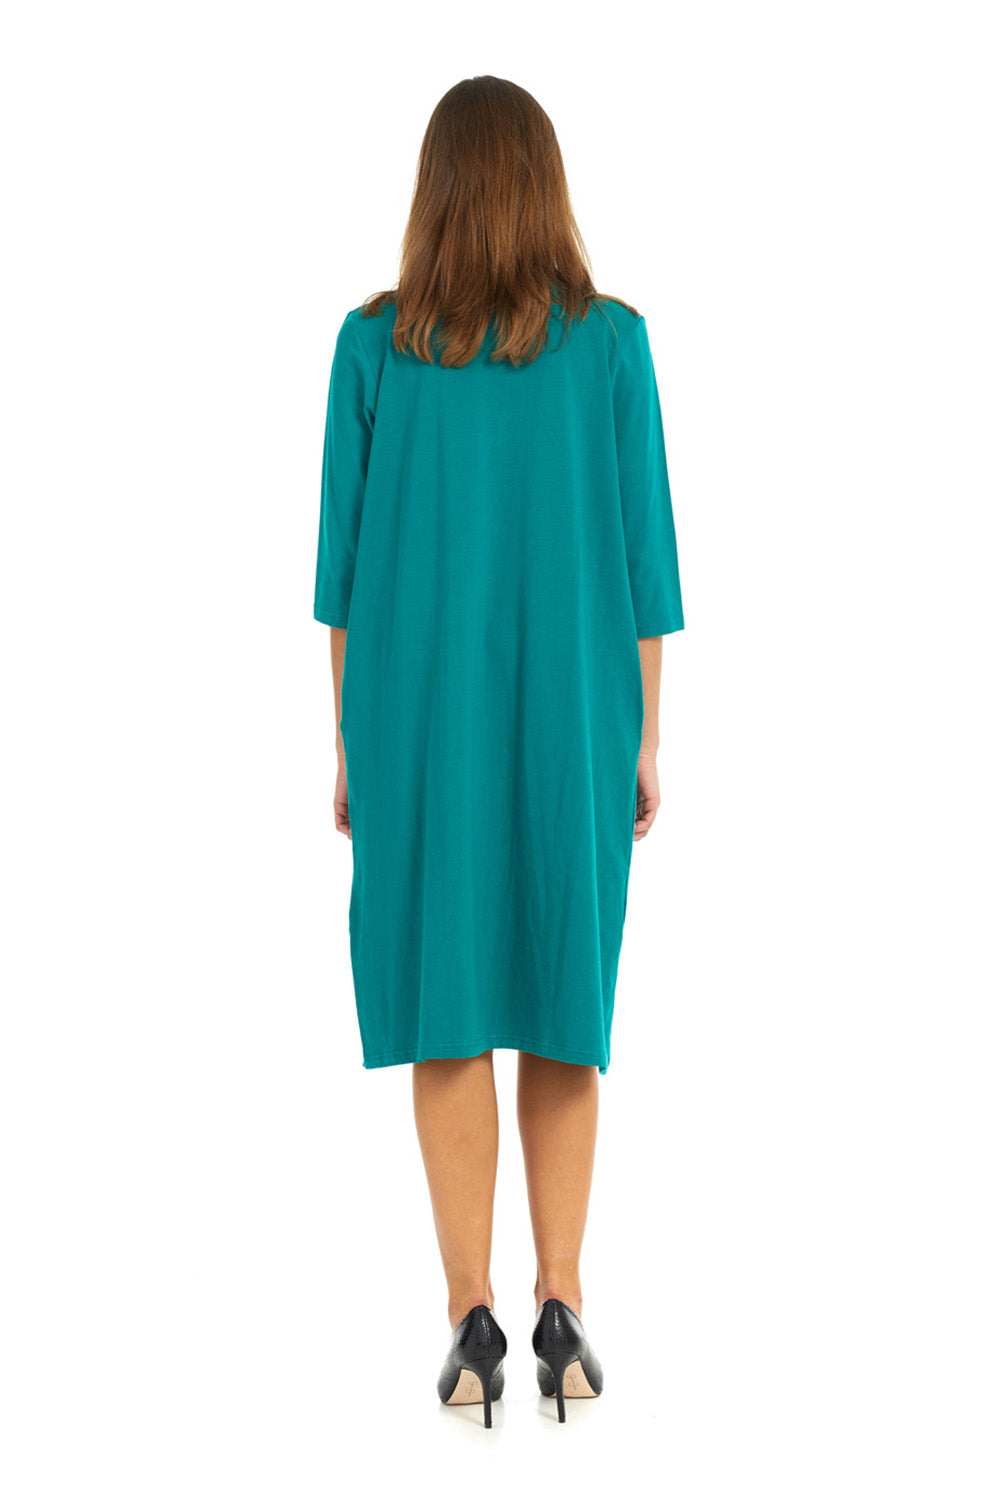 Soft cotton teal t-shirt dress with pockets. modest 3/4 sleeves and knee length